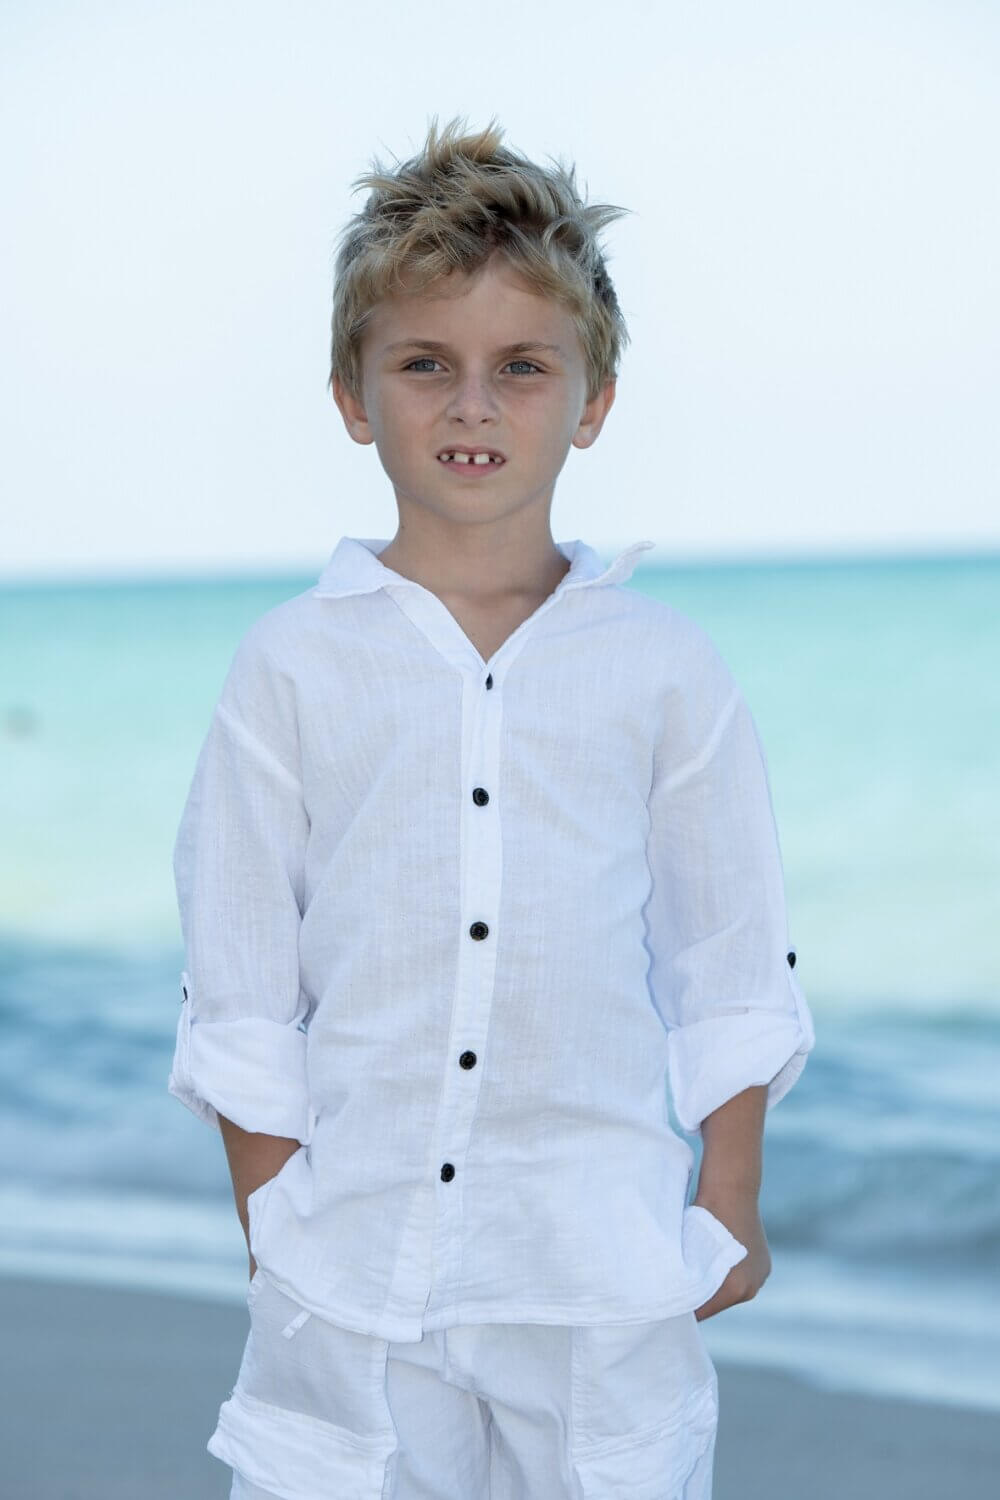 Boy on beach with white top